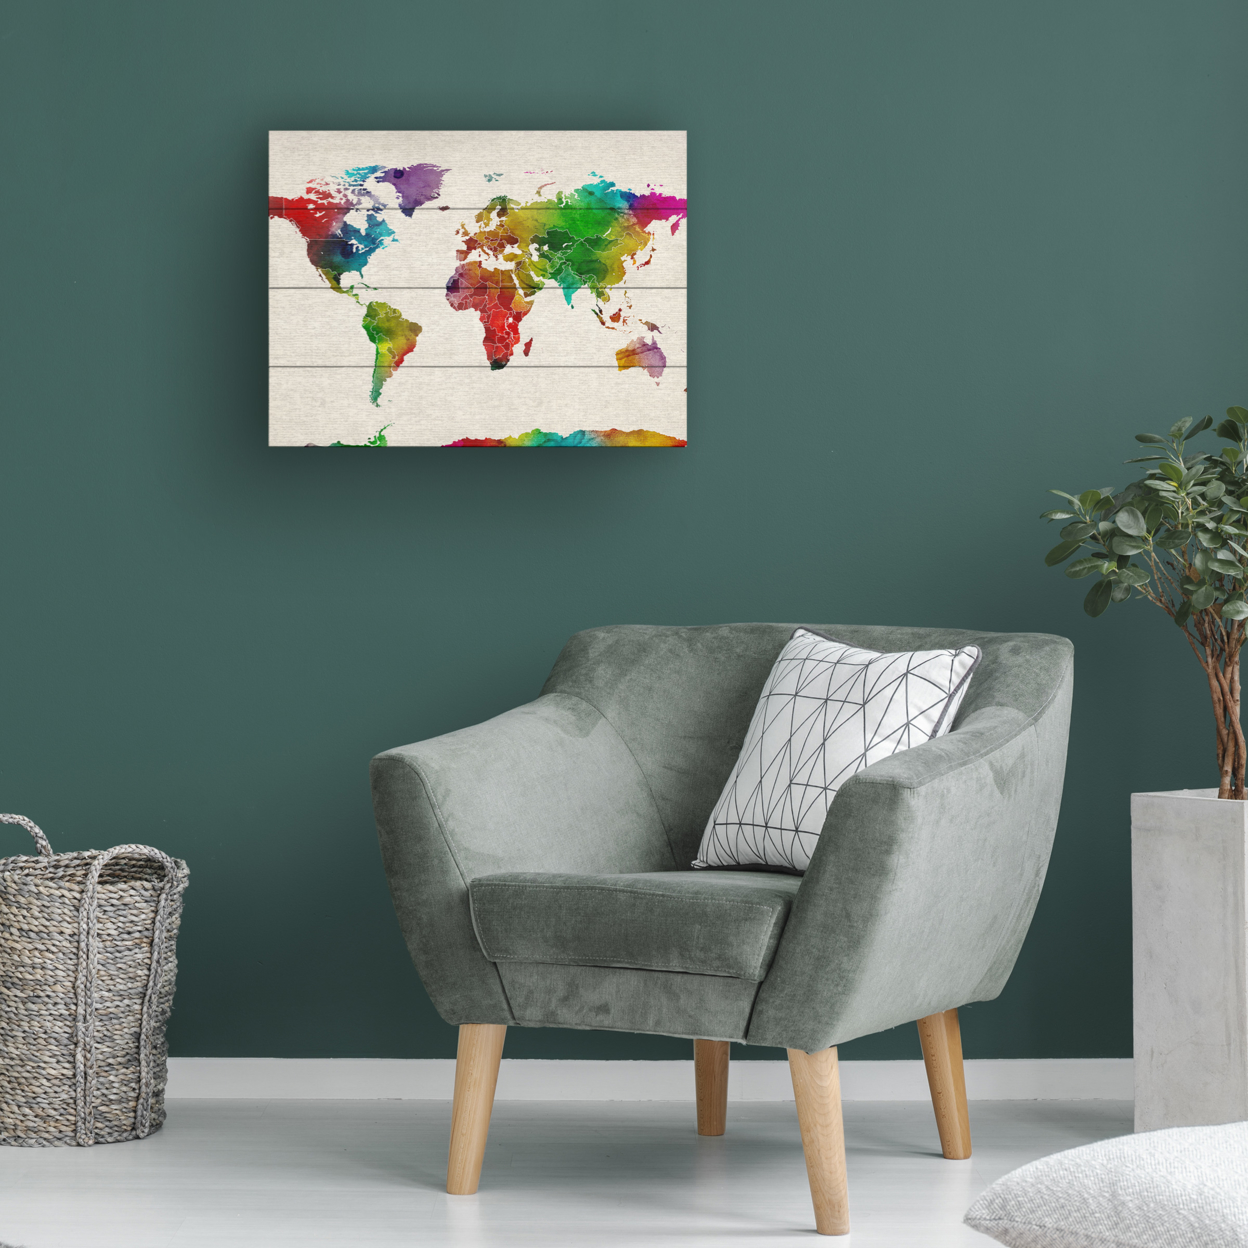 Wall Art 12 X 16 Inches Titled Watercolor World Map II Ready To Hang Printed On Wooden Planks